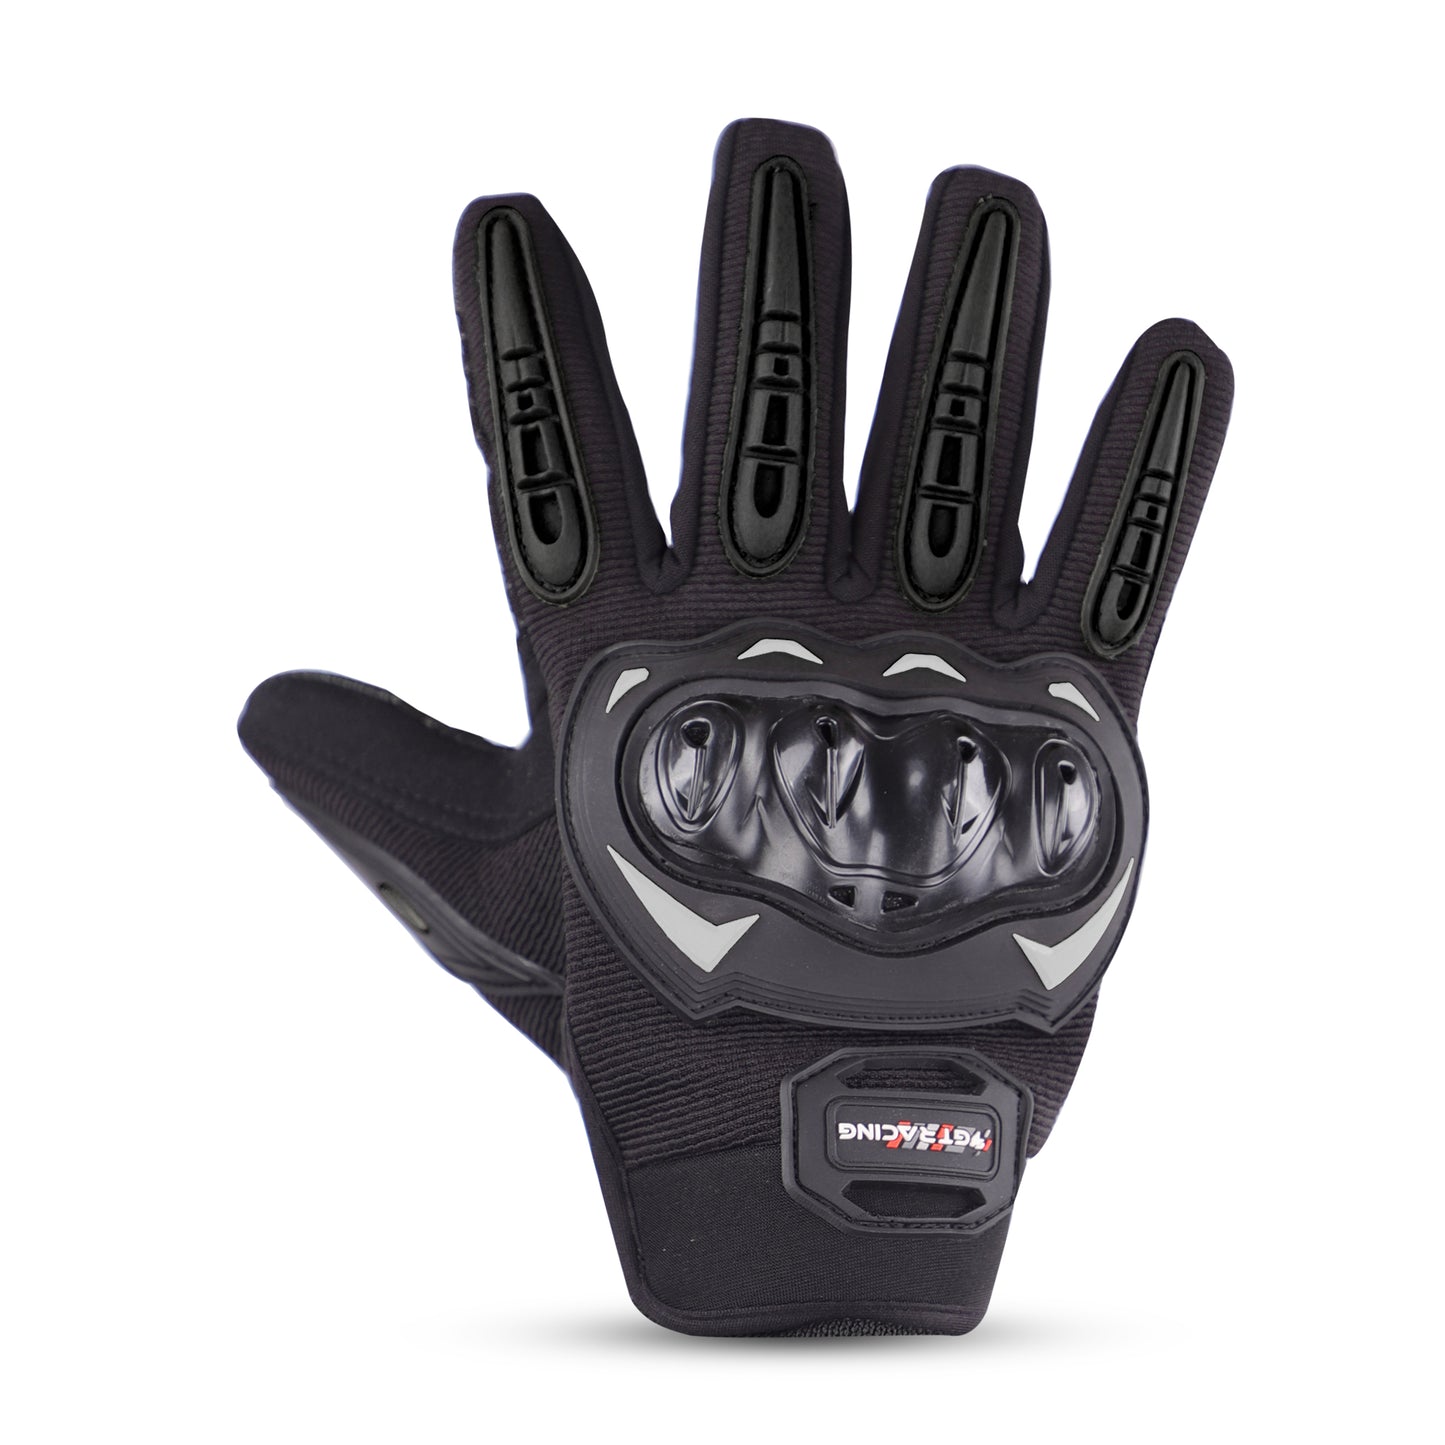 Steelbird GT-17 Full Finger Bike Riding Gloves with Touch Screen Sensitivity at Thumb and Index Finger, Protective Off-Road Motorbike Racing (Black)